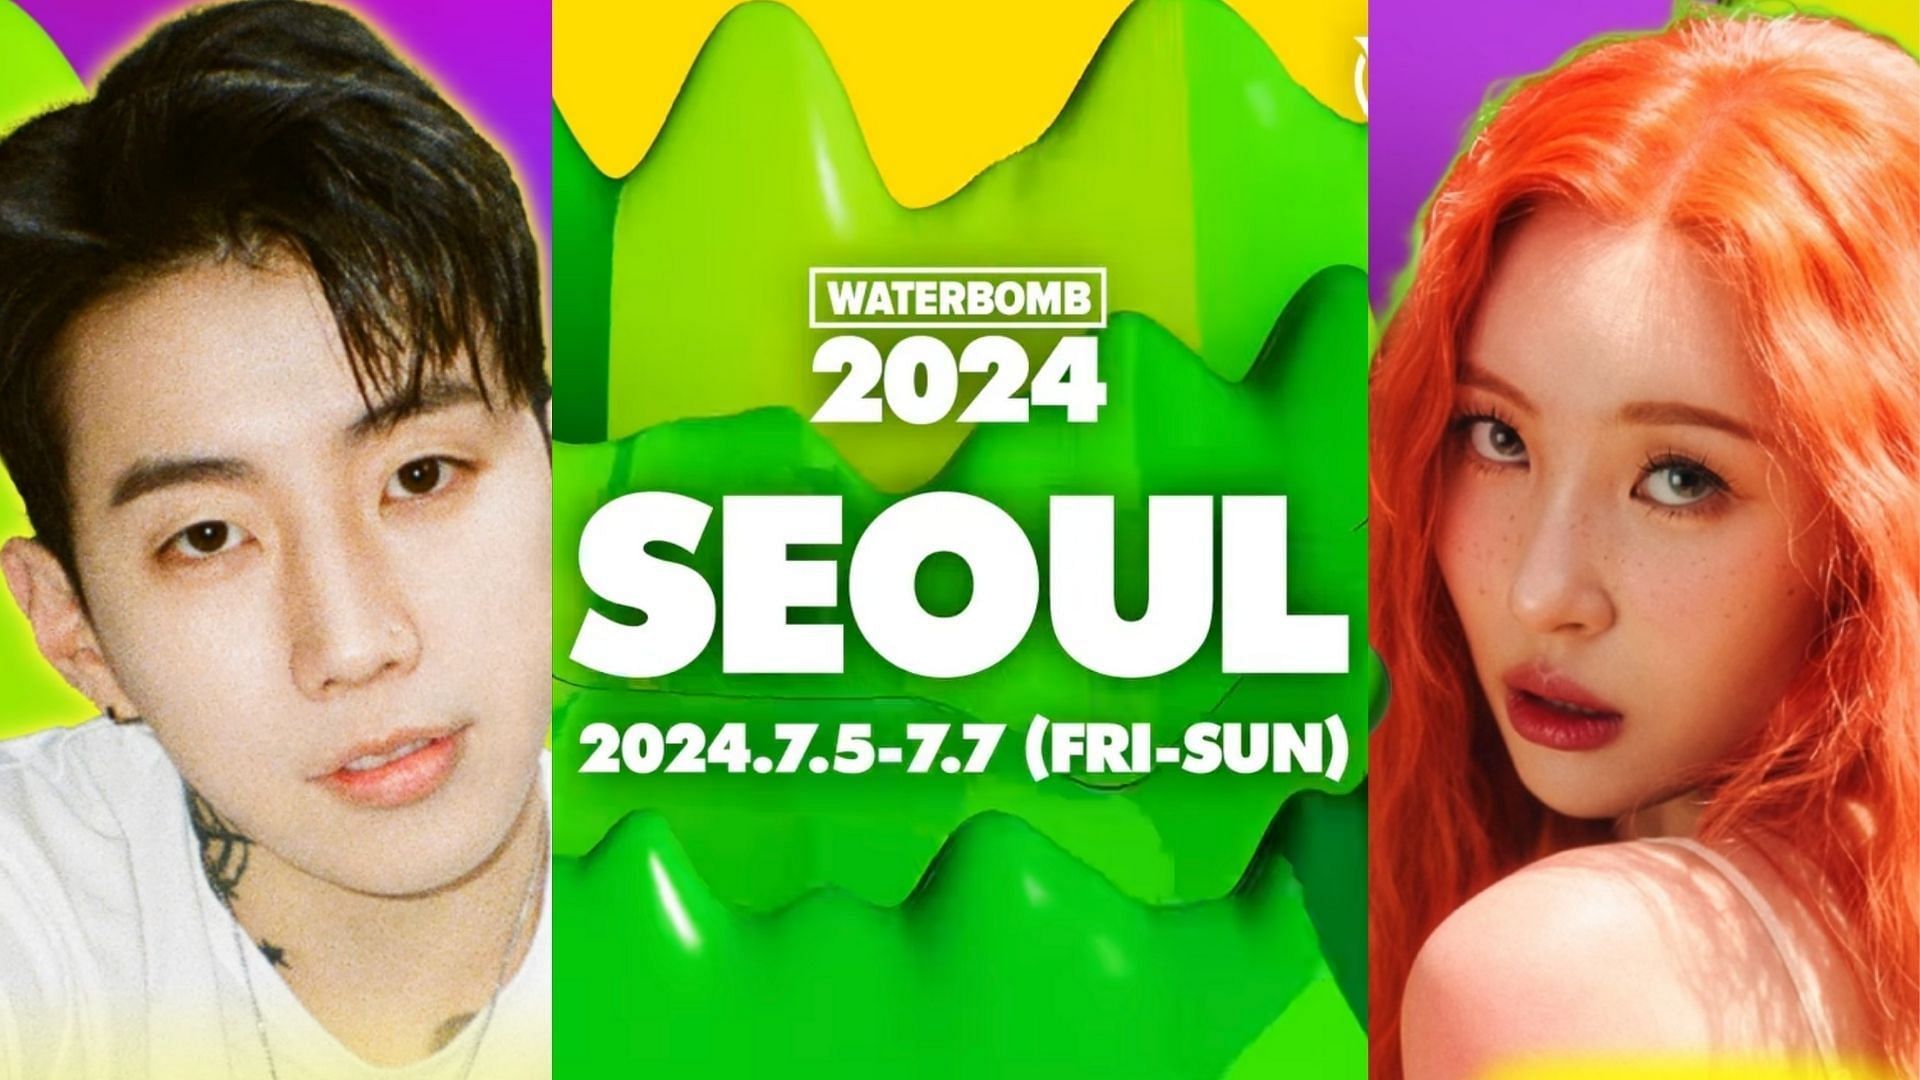 Waterbomb 2024 Seoul (Image via Instagram/@waterbomb_official)